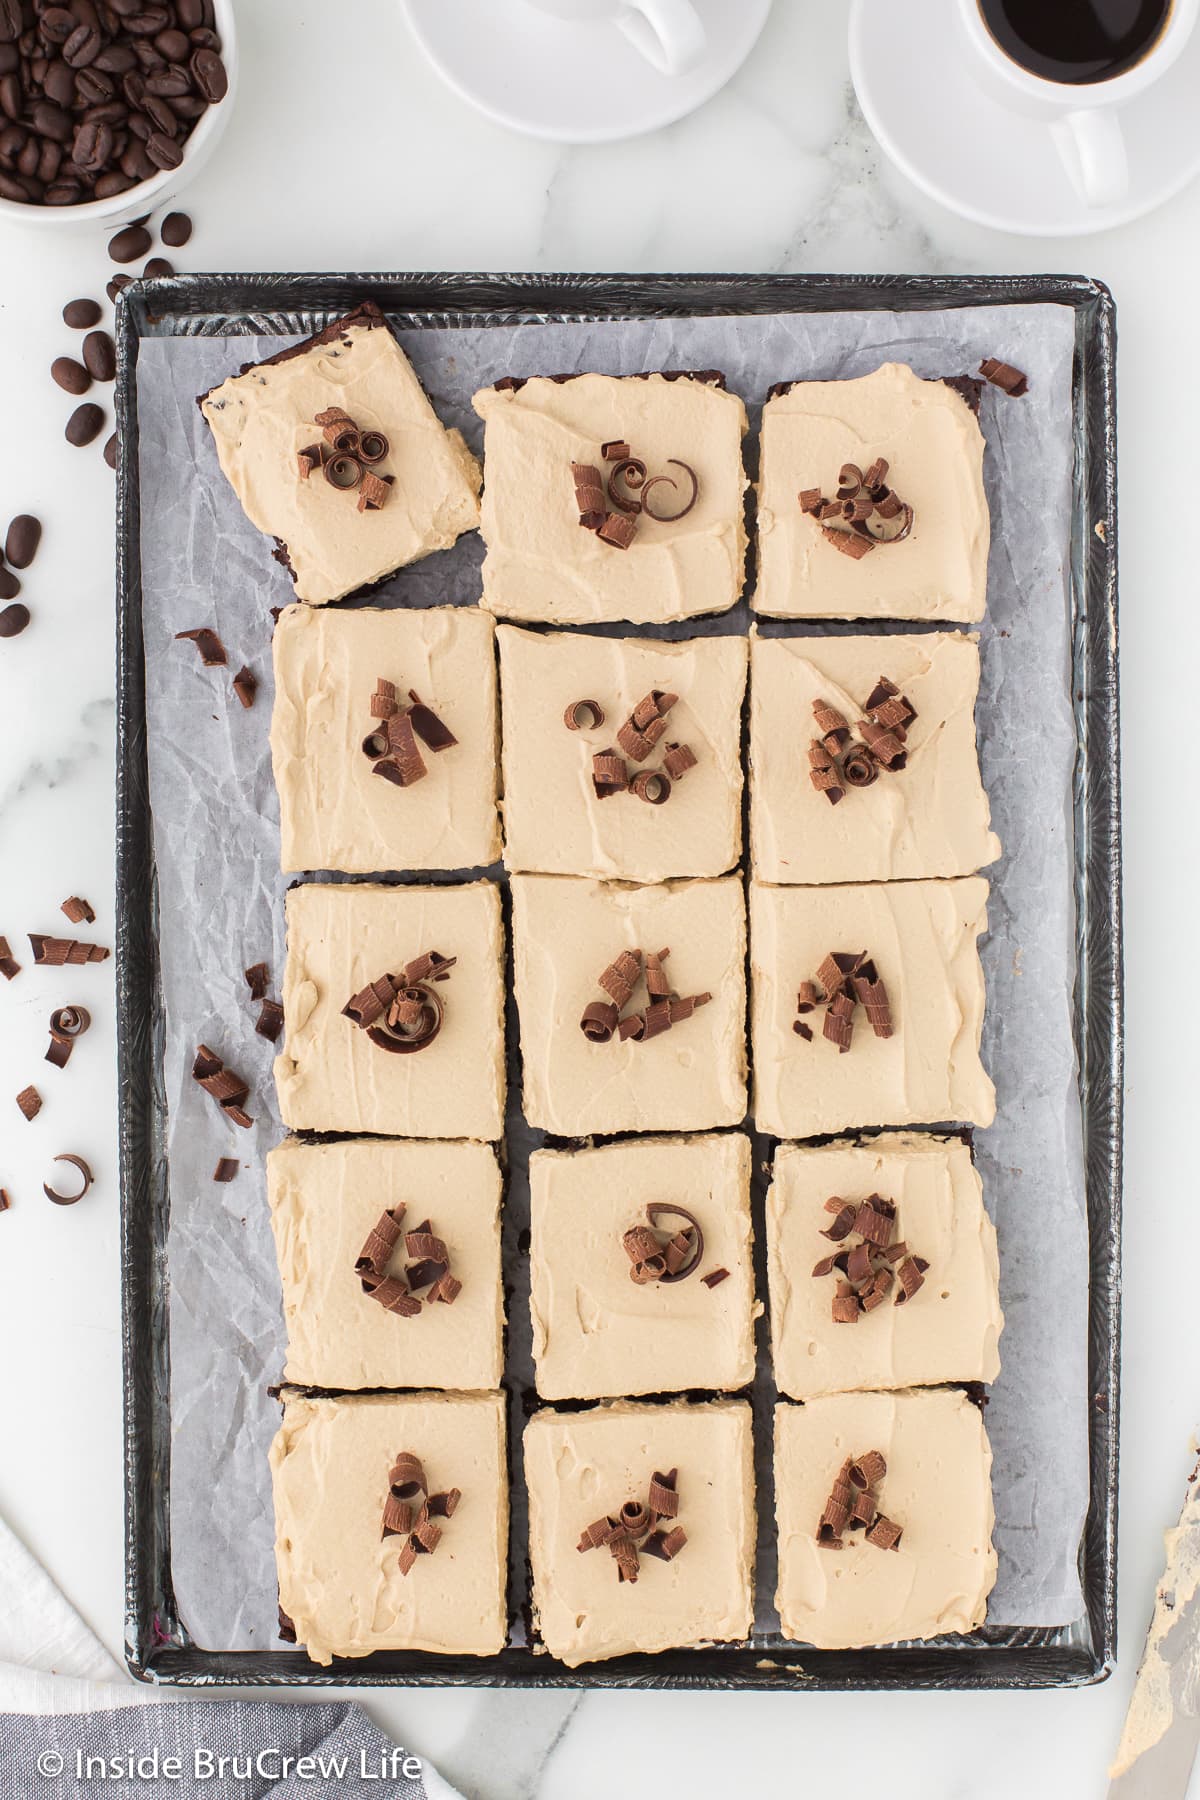 A sheet pan with squares of coffee brownies on it.